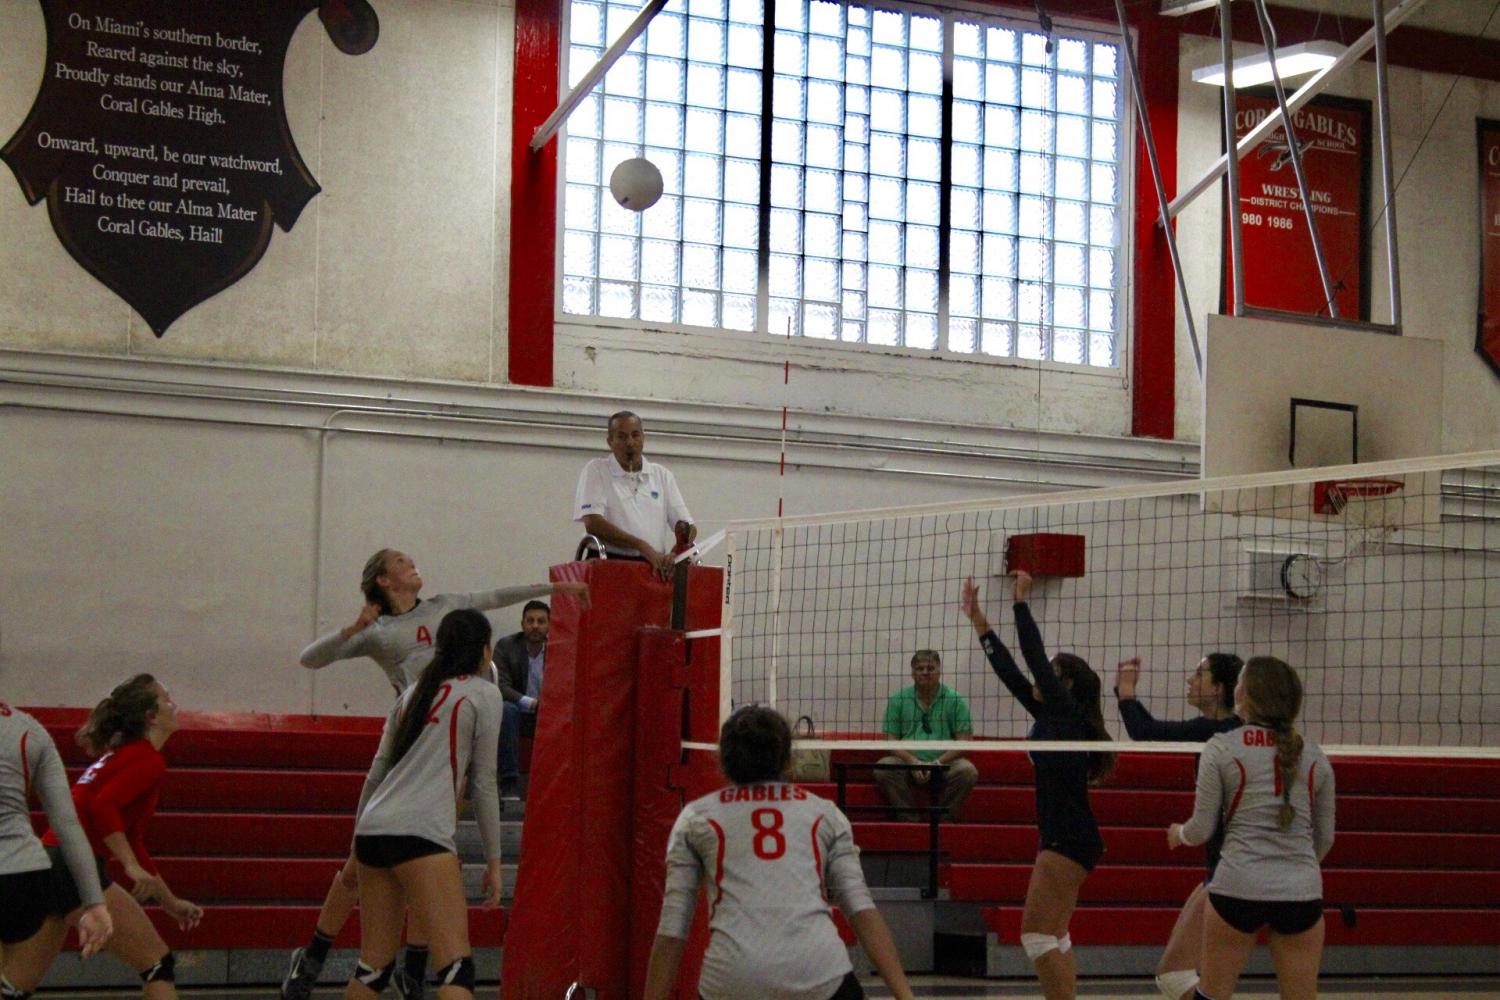 Gables+Volleyball+Takes+a+Loss+against+Lourdes